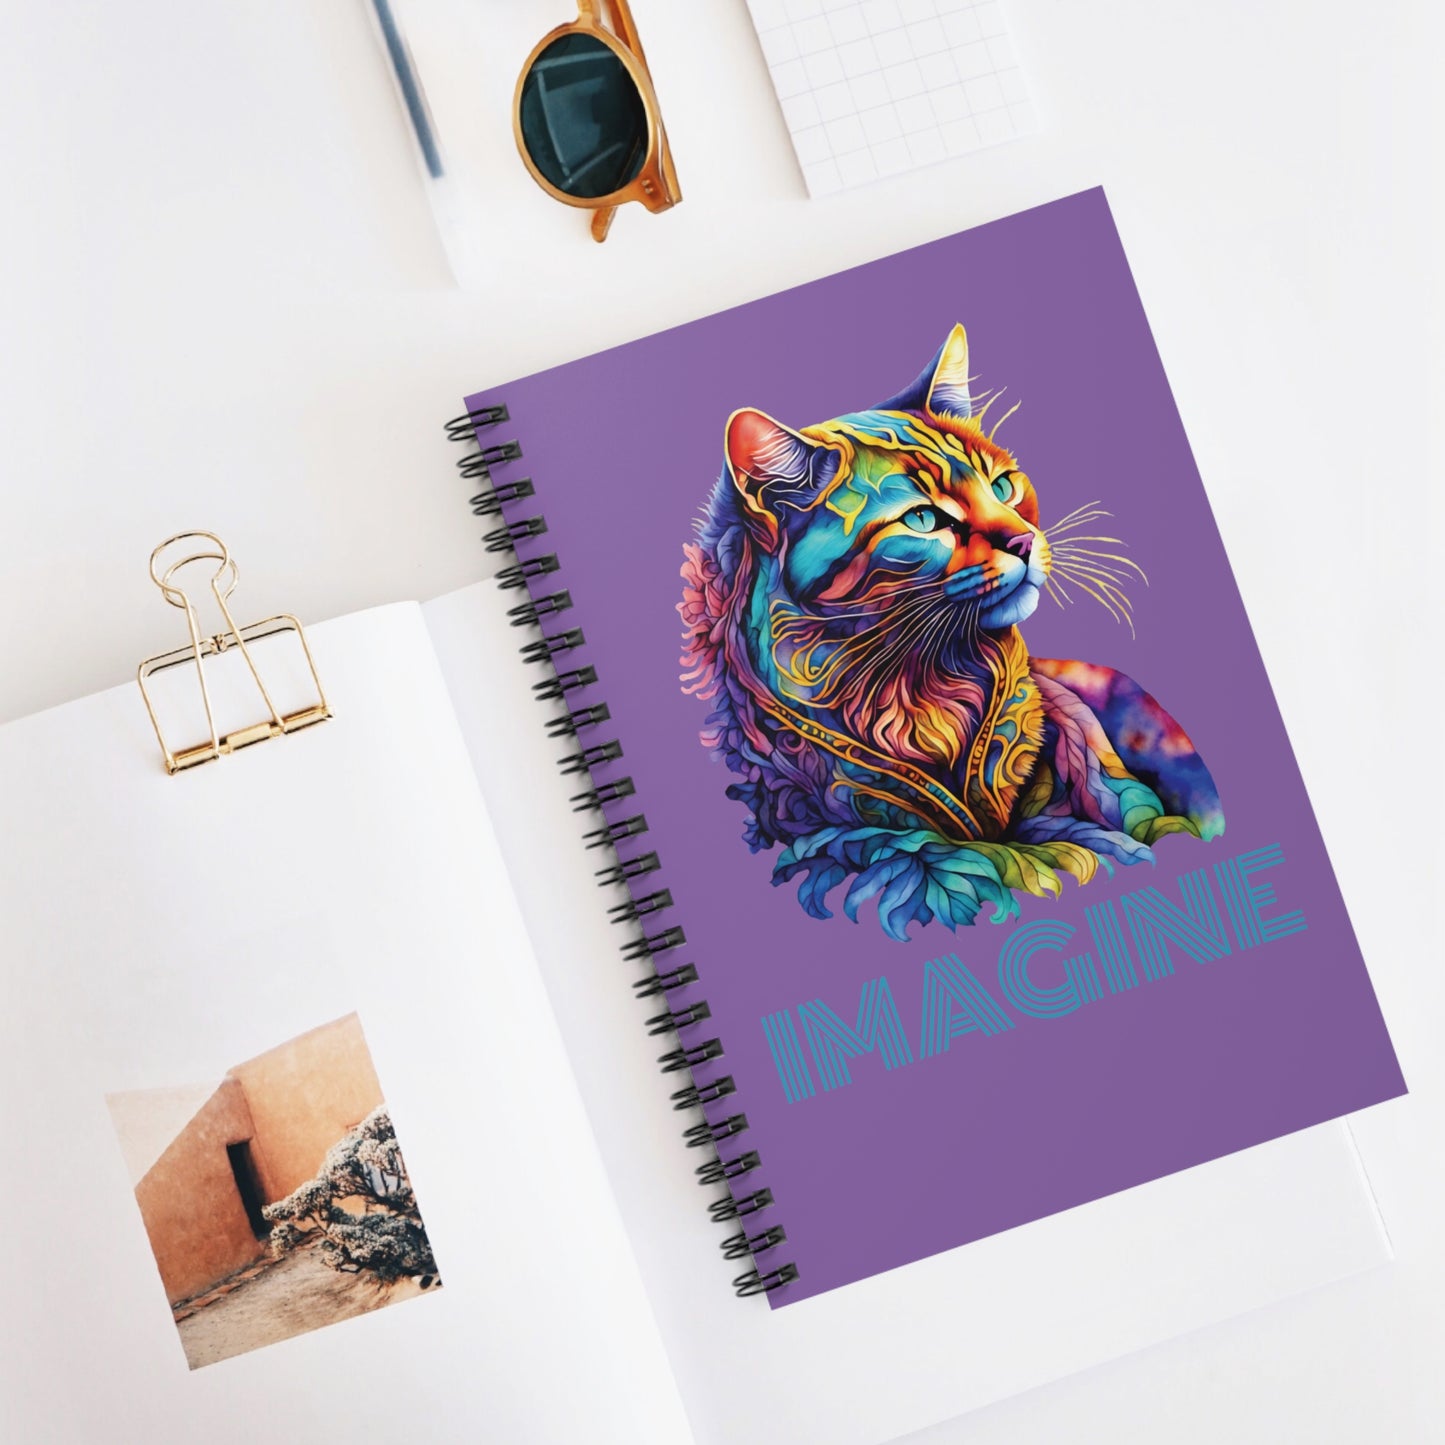 Cat IMAGINE lavender Spiral Notebook - Ruled Line, Perfect Gift For Cat Lovers